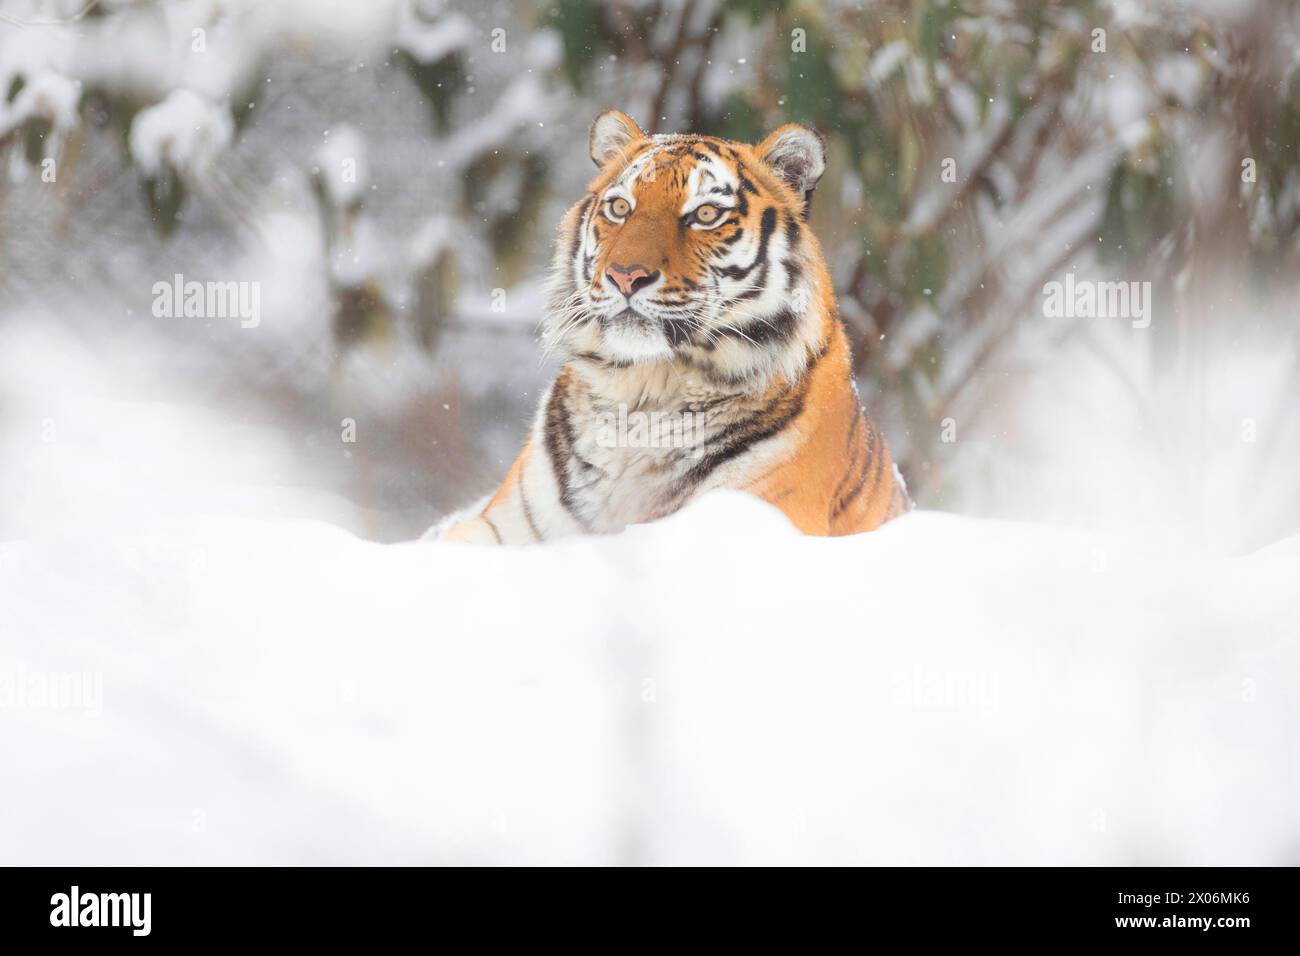 Siberian tiger, Amurian tiger (Panthera tigris altaica), looks out from behind the snow Stock Photo